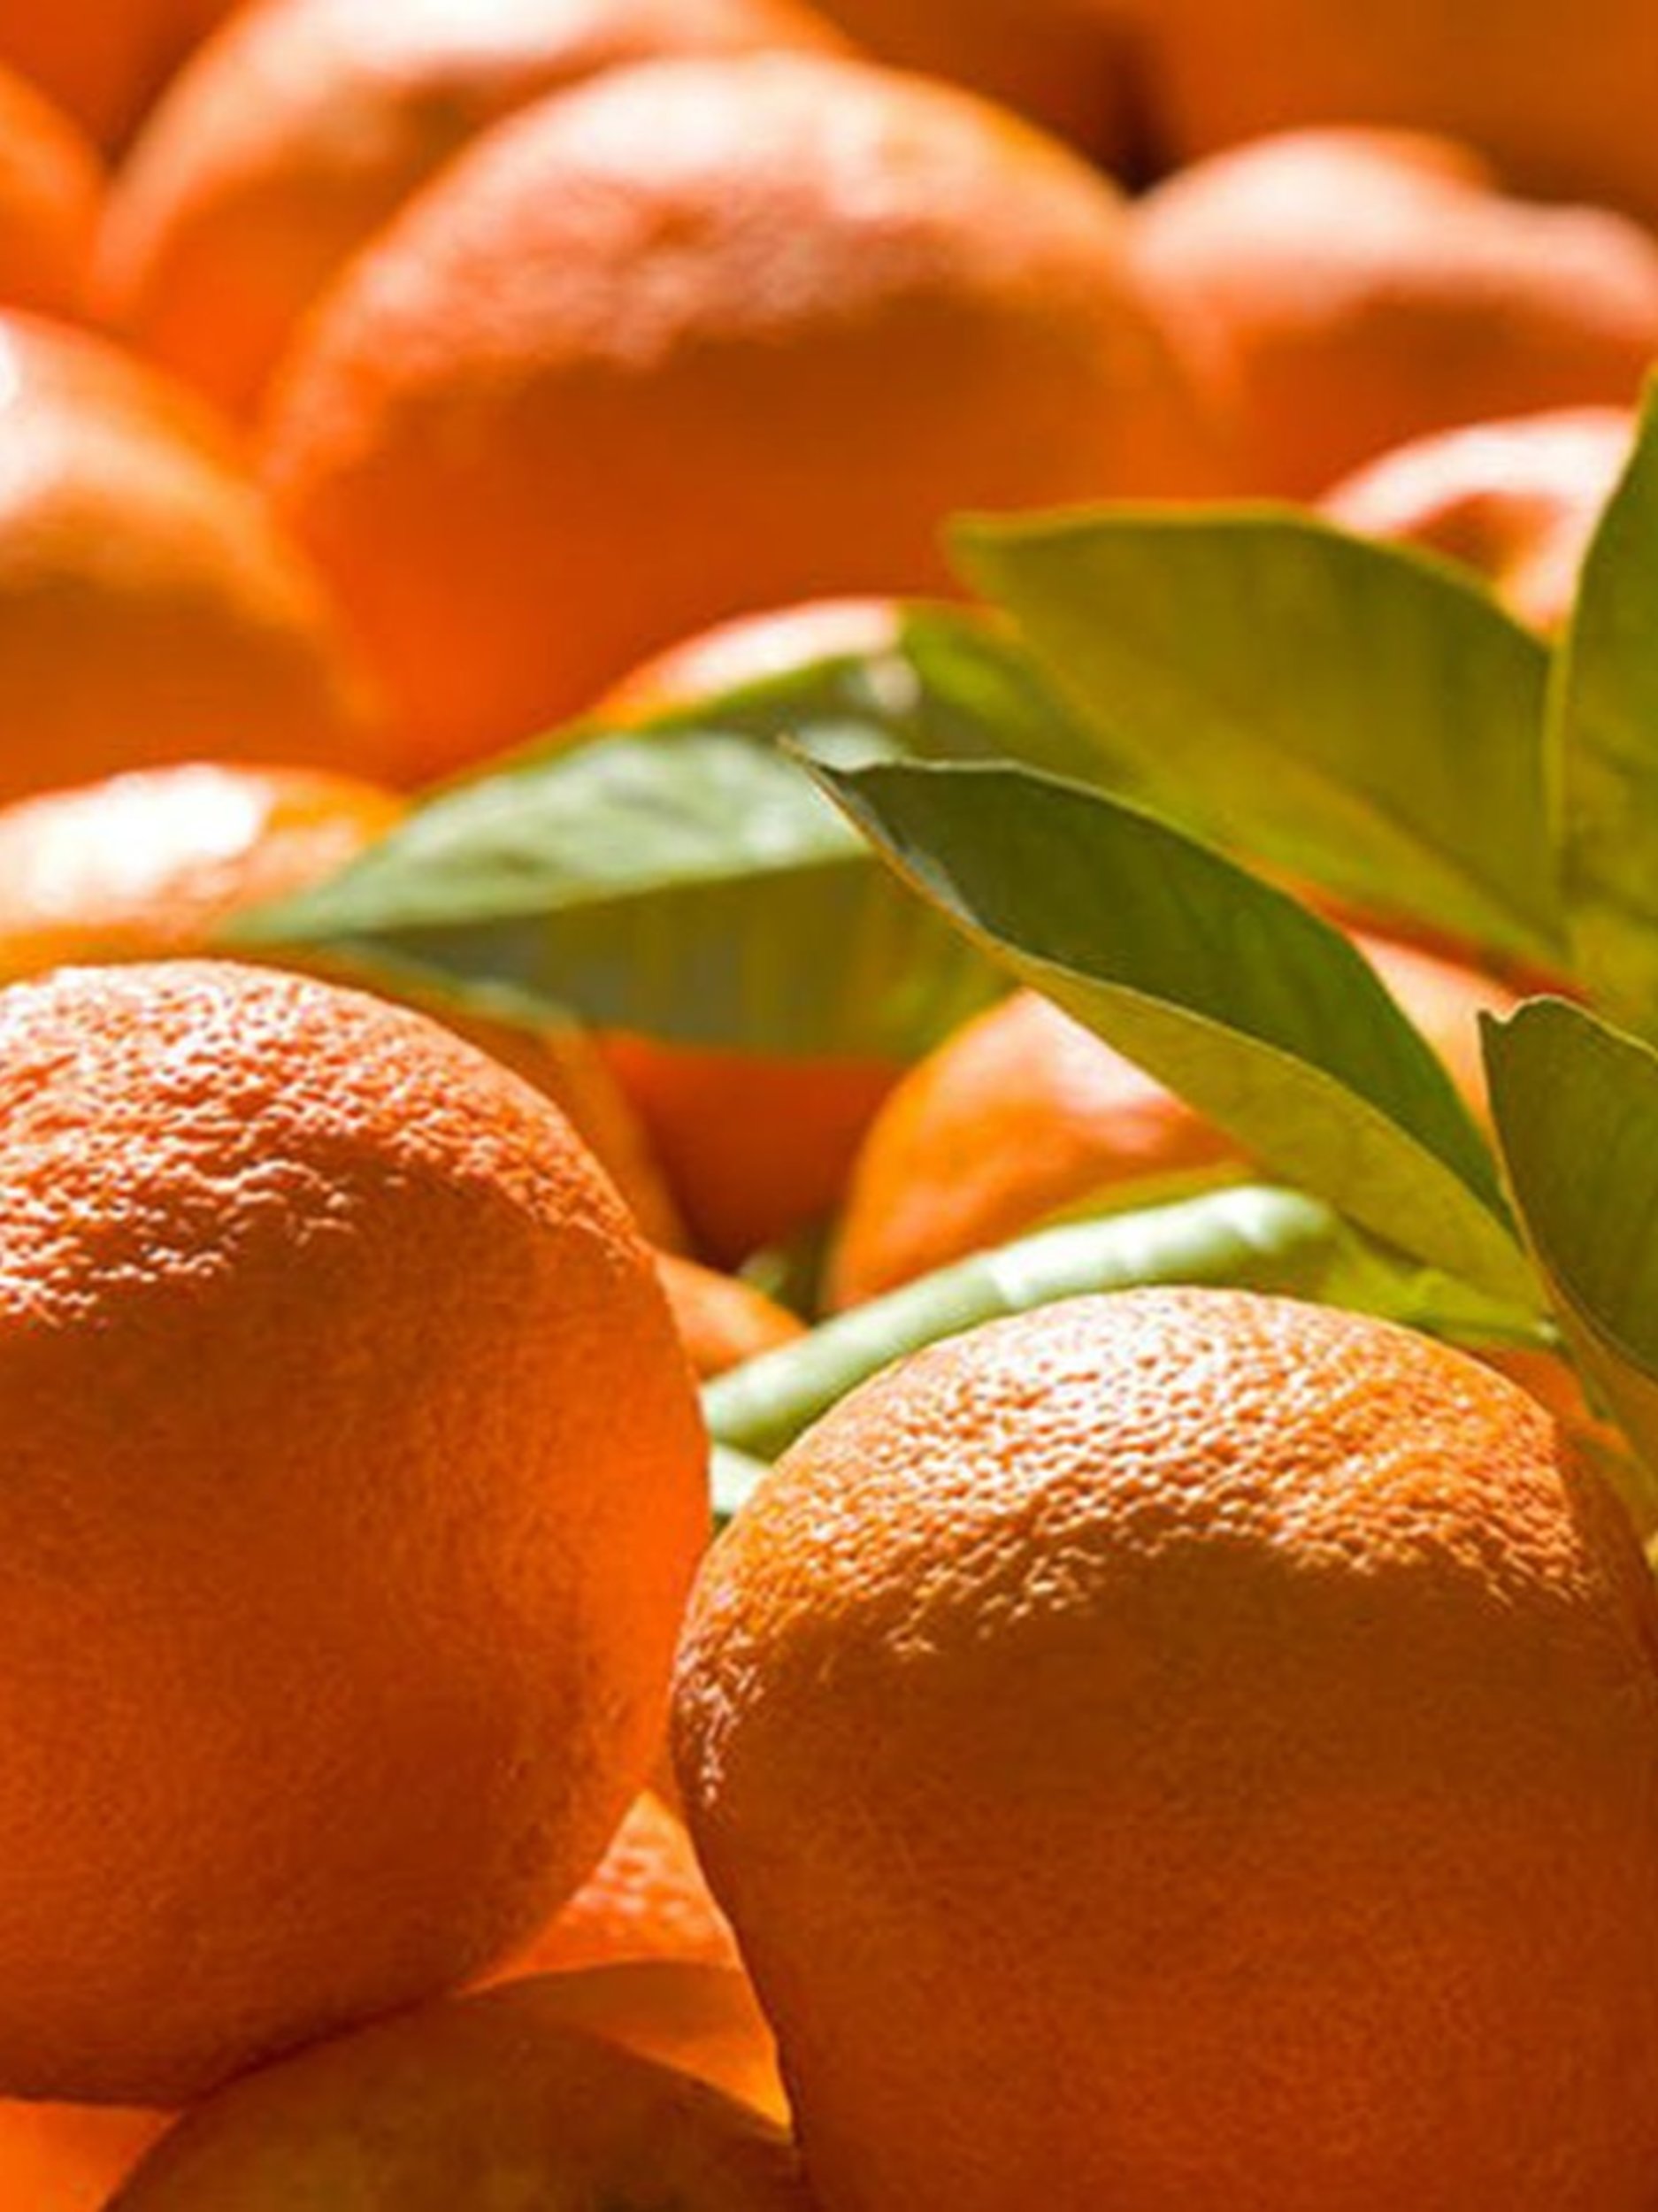 https://www.purewow.com/stories/types-of-oranges-you-need-to-know/assets/21.jpeg